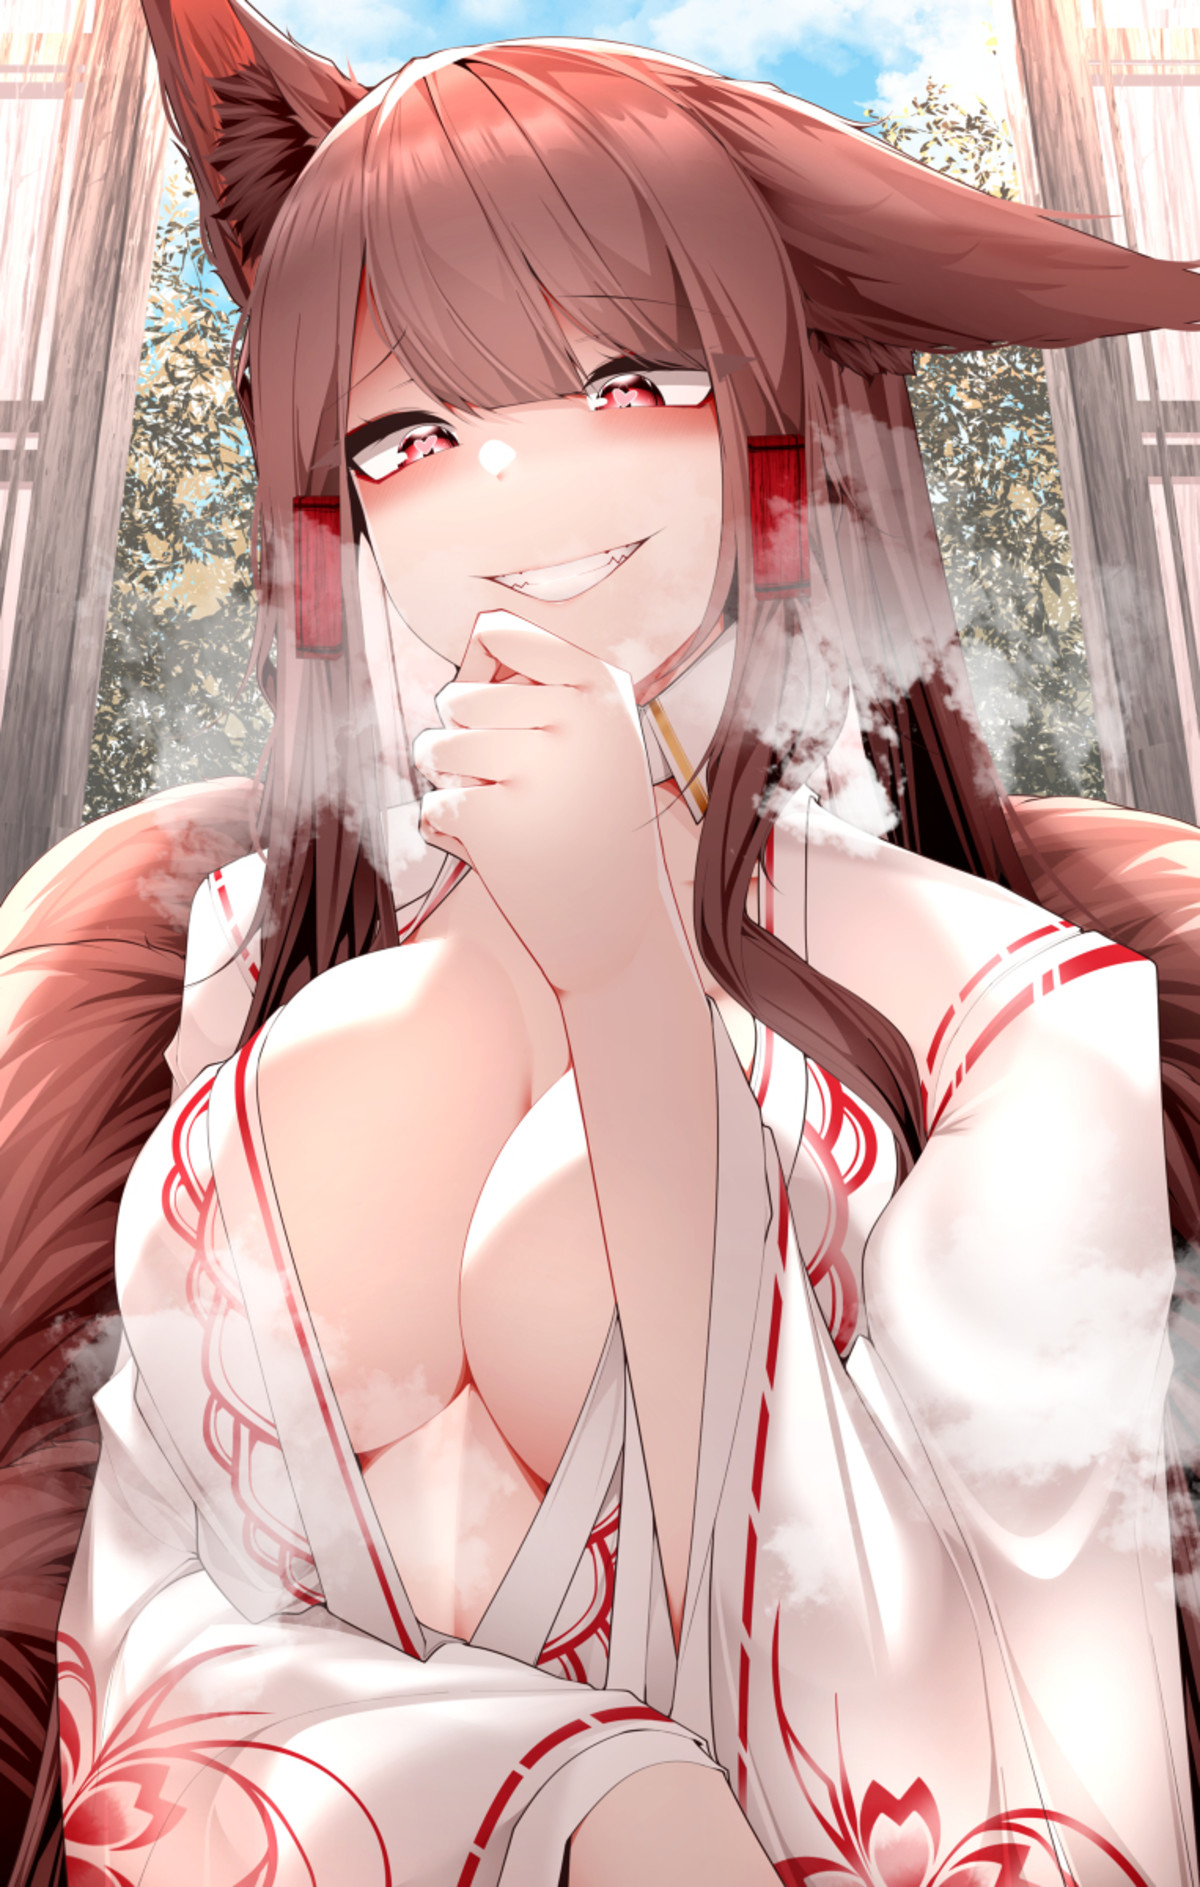 Akagi in heat. .. damn whoever drew this knows good titty anatomy me are caveman me respect big bitty for big titty